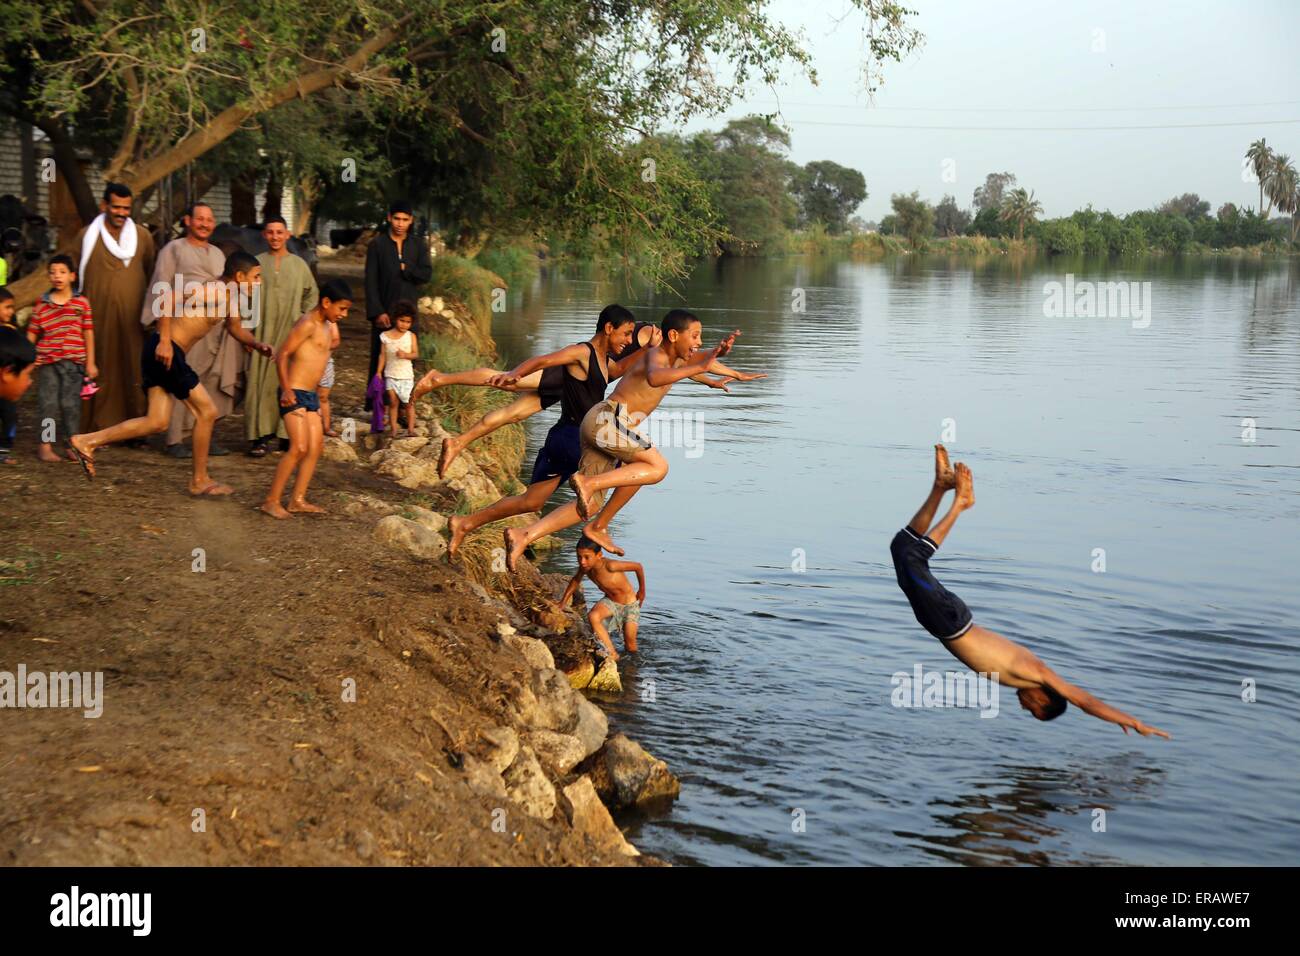 Beijing, Egypt. 27th May, 2015. Egyptians boys play in the Nile River in Al Minya Governorate, Egypt, on May 27, 2015. © Ahmed Gomaa/Xinhua/Alamy Live News Stock Photo